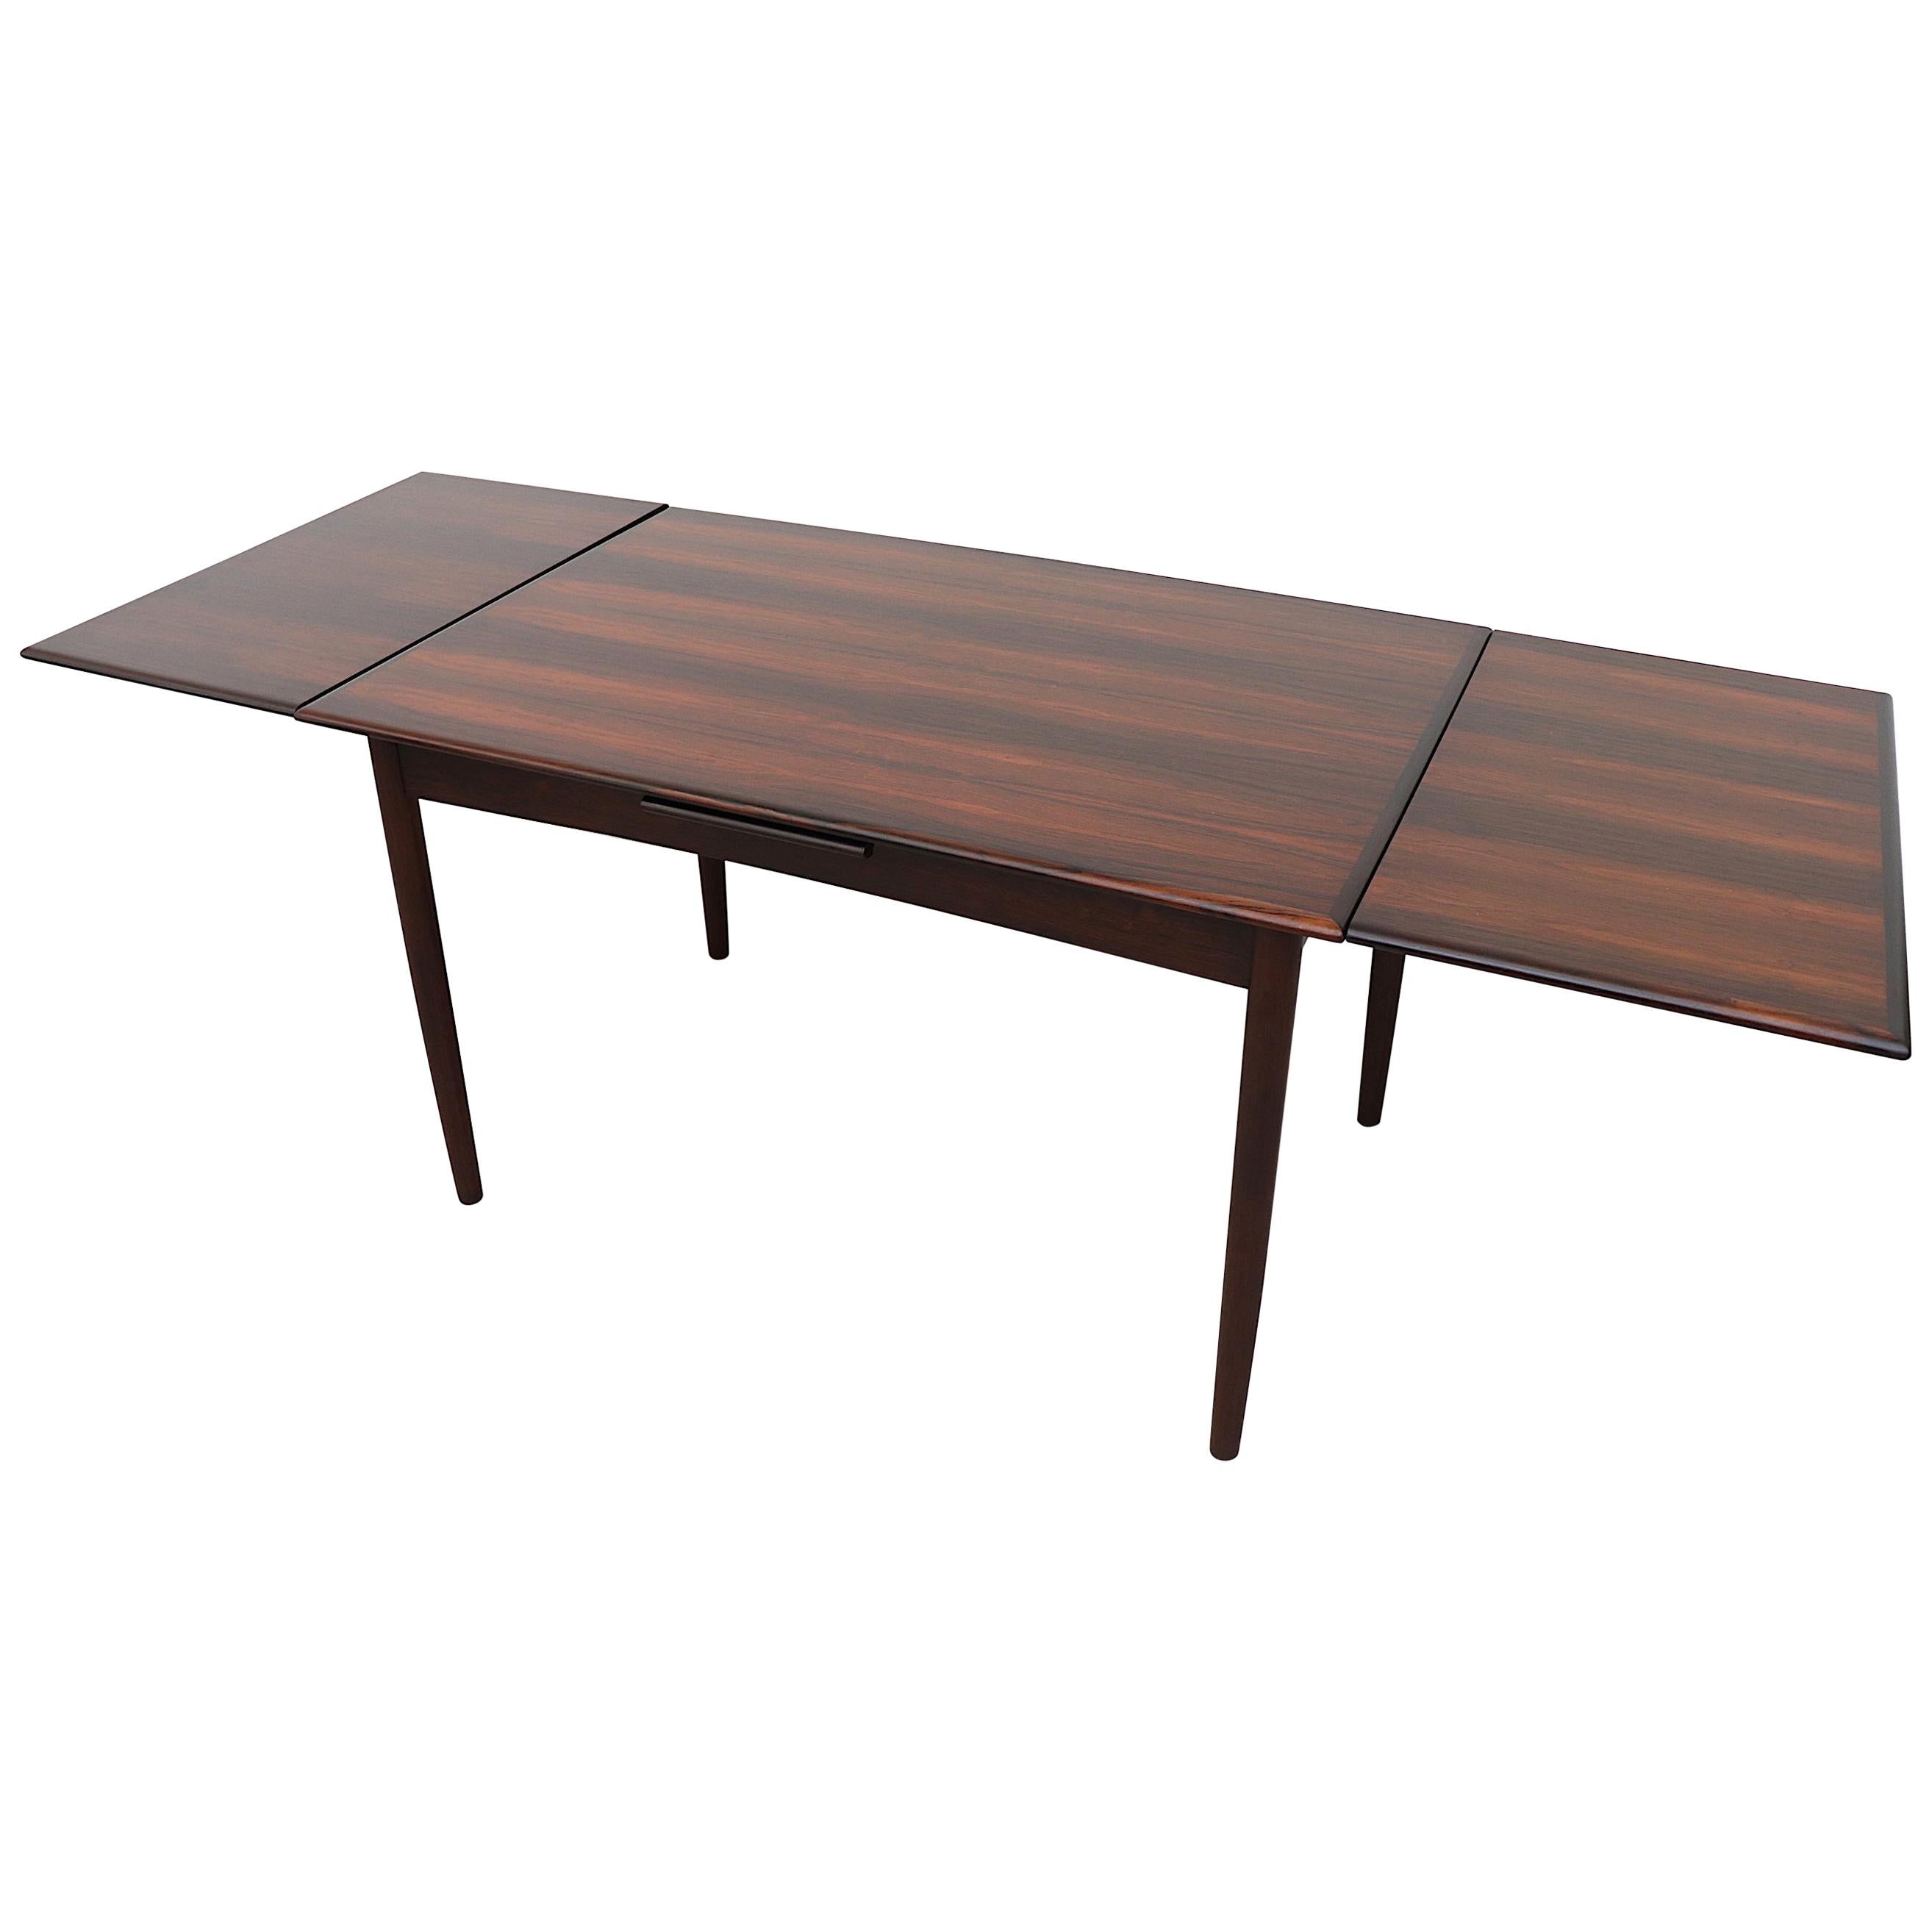 Danish Rosewood Dining Table with Leaf Extension